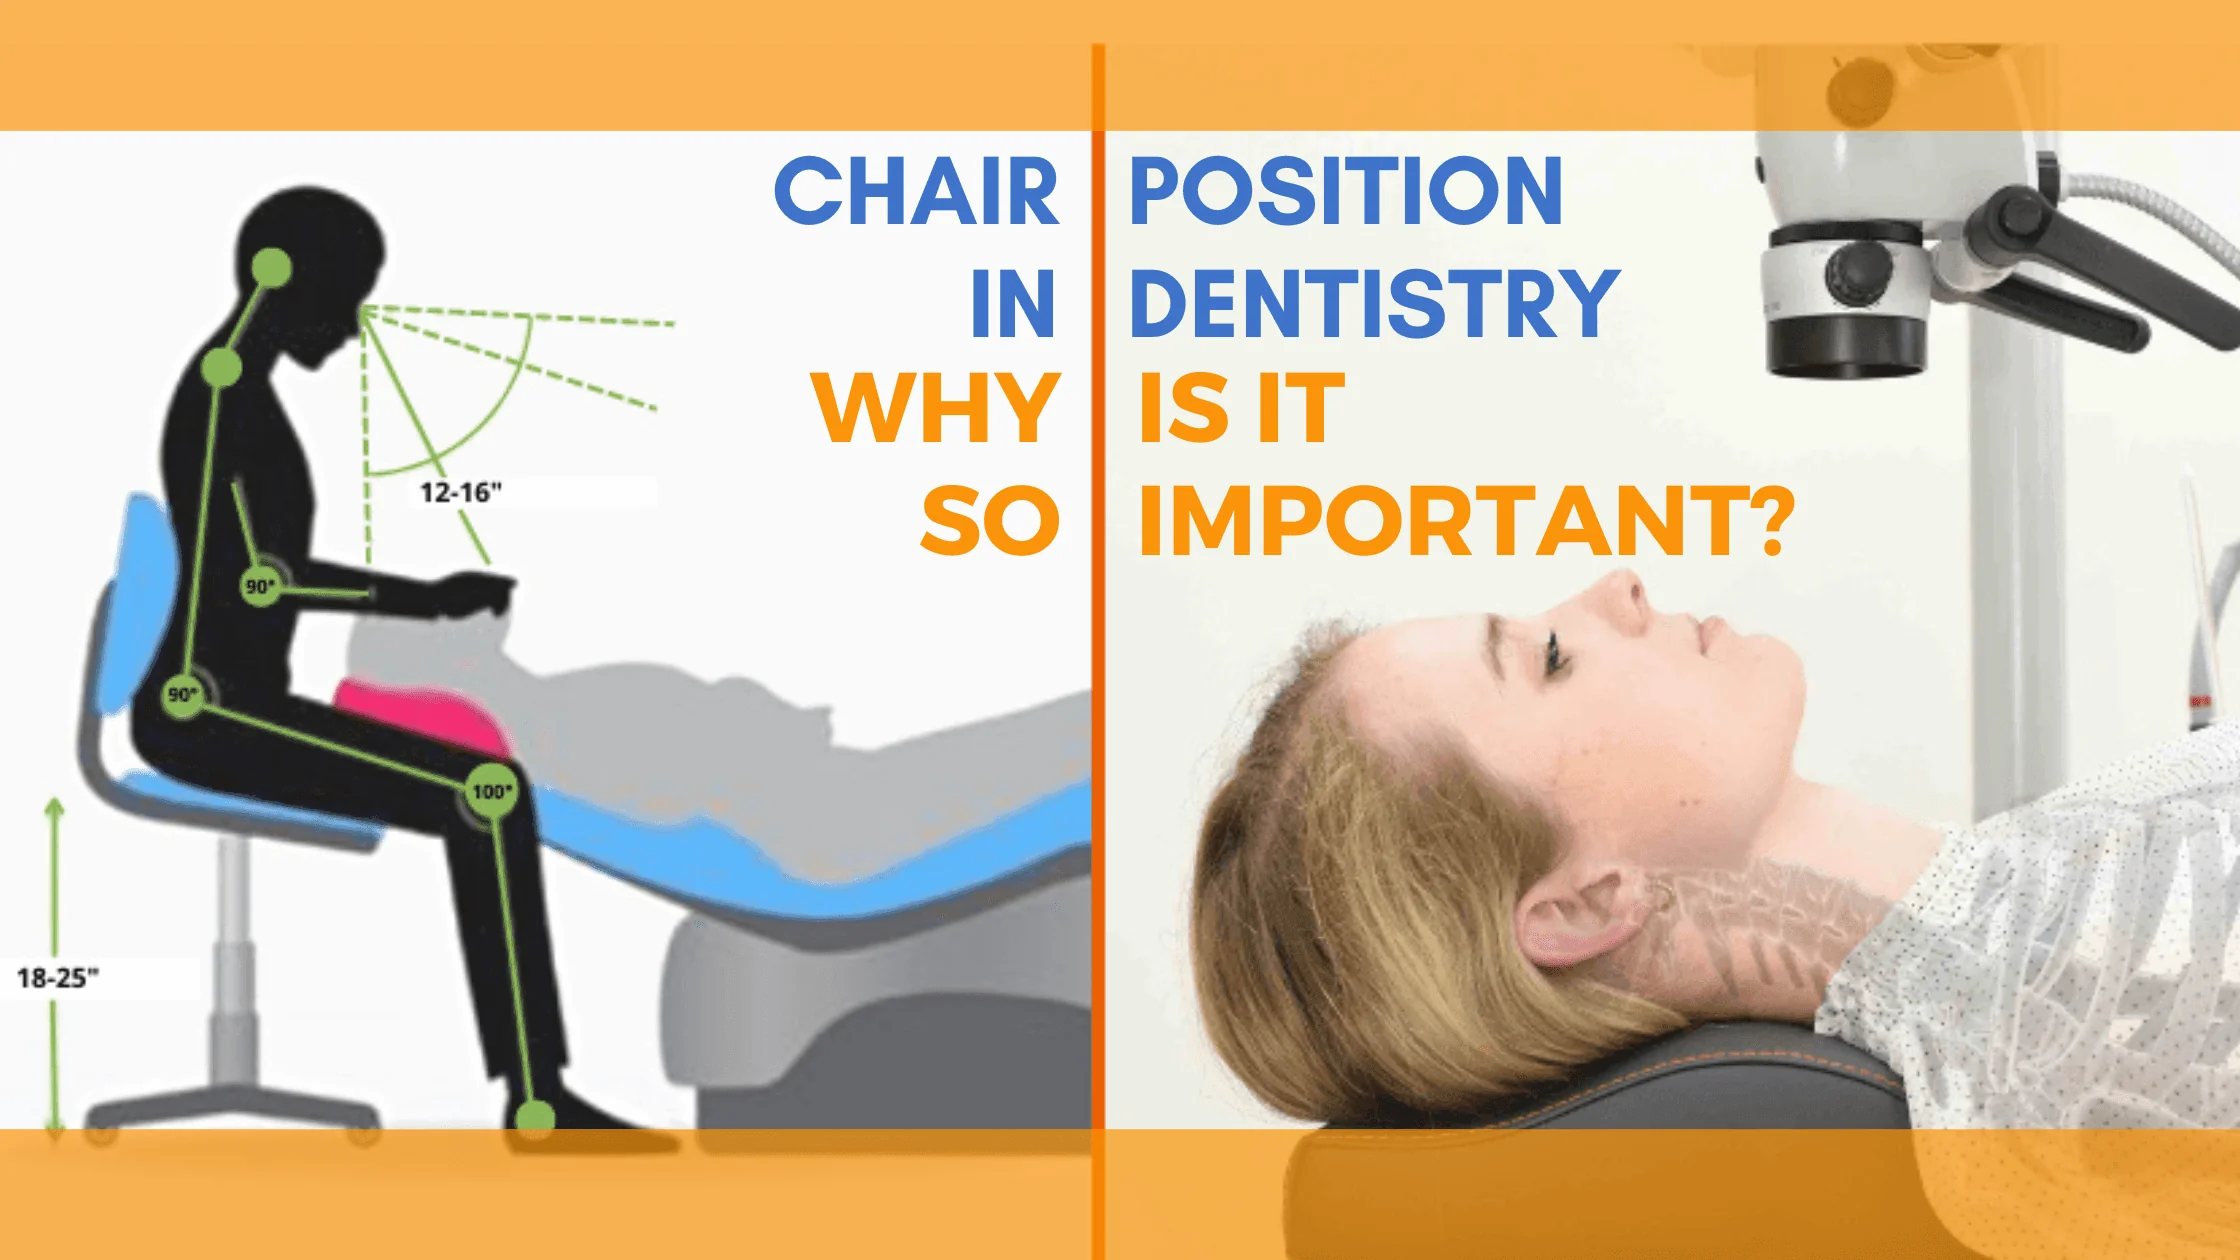 Chair position in dentistry - Why is it so important?